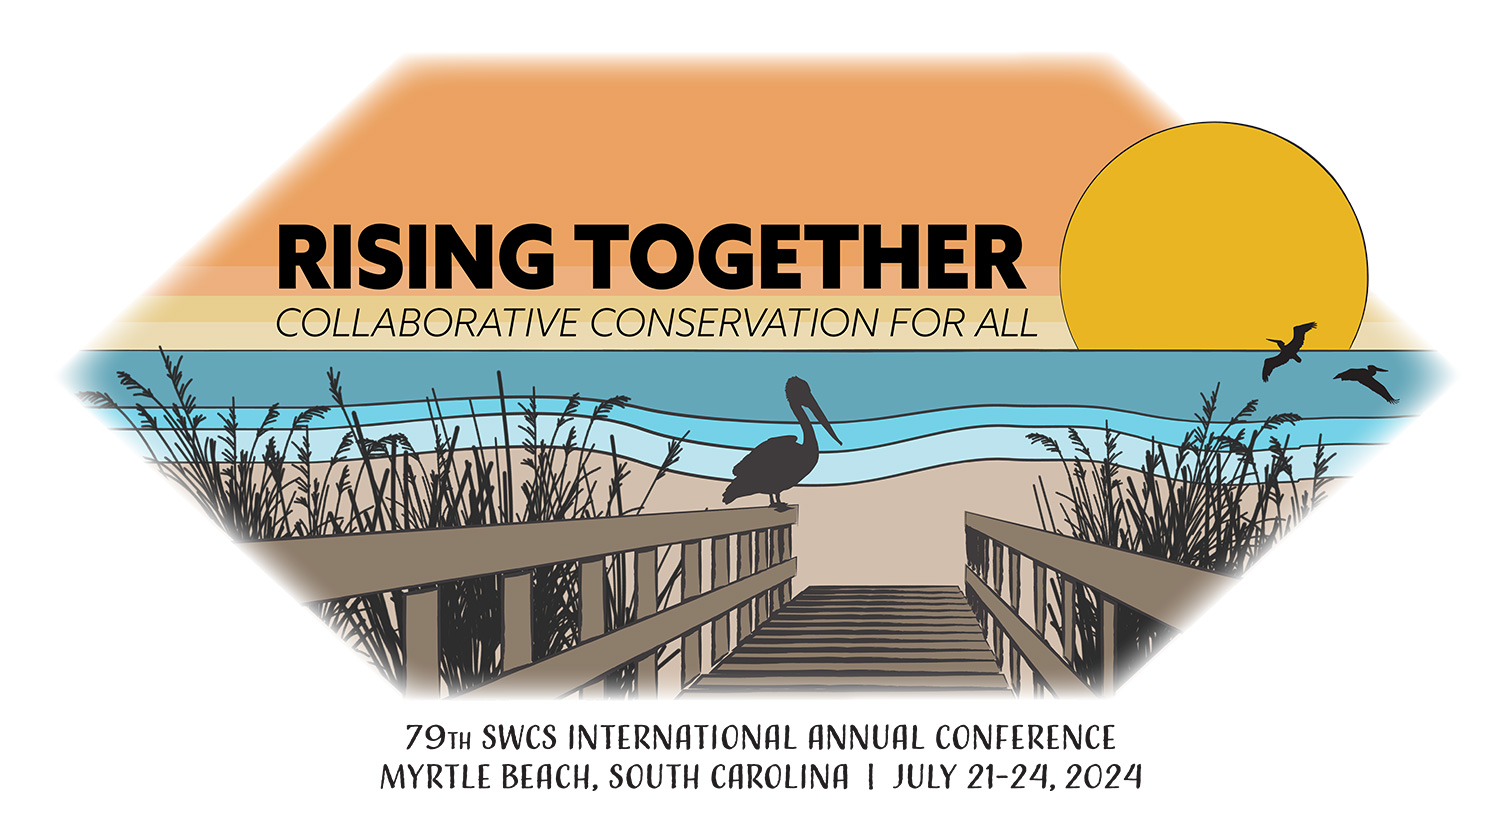 SWCS International Annual Conference